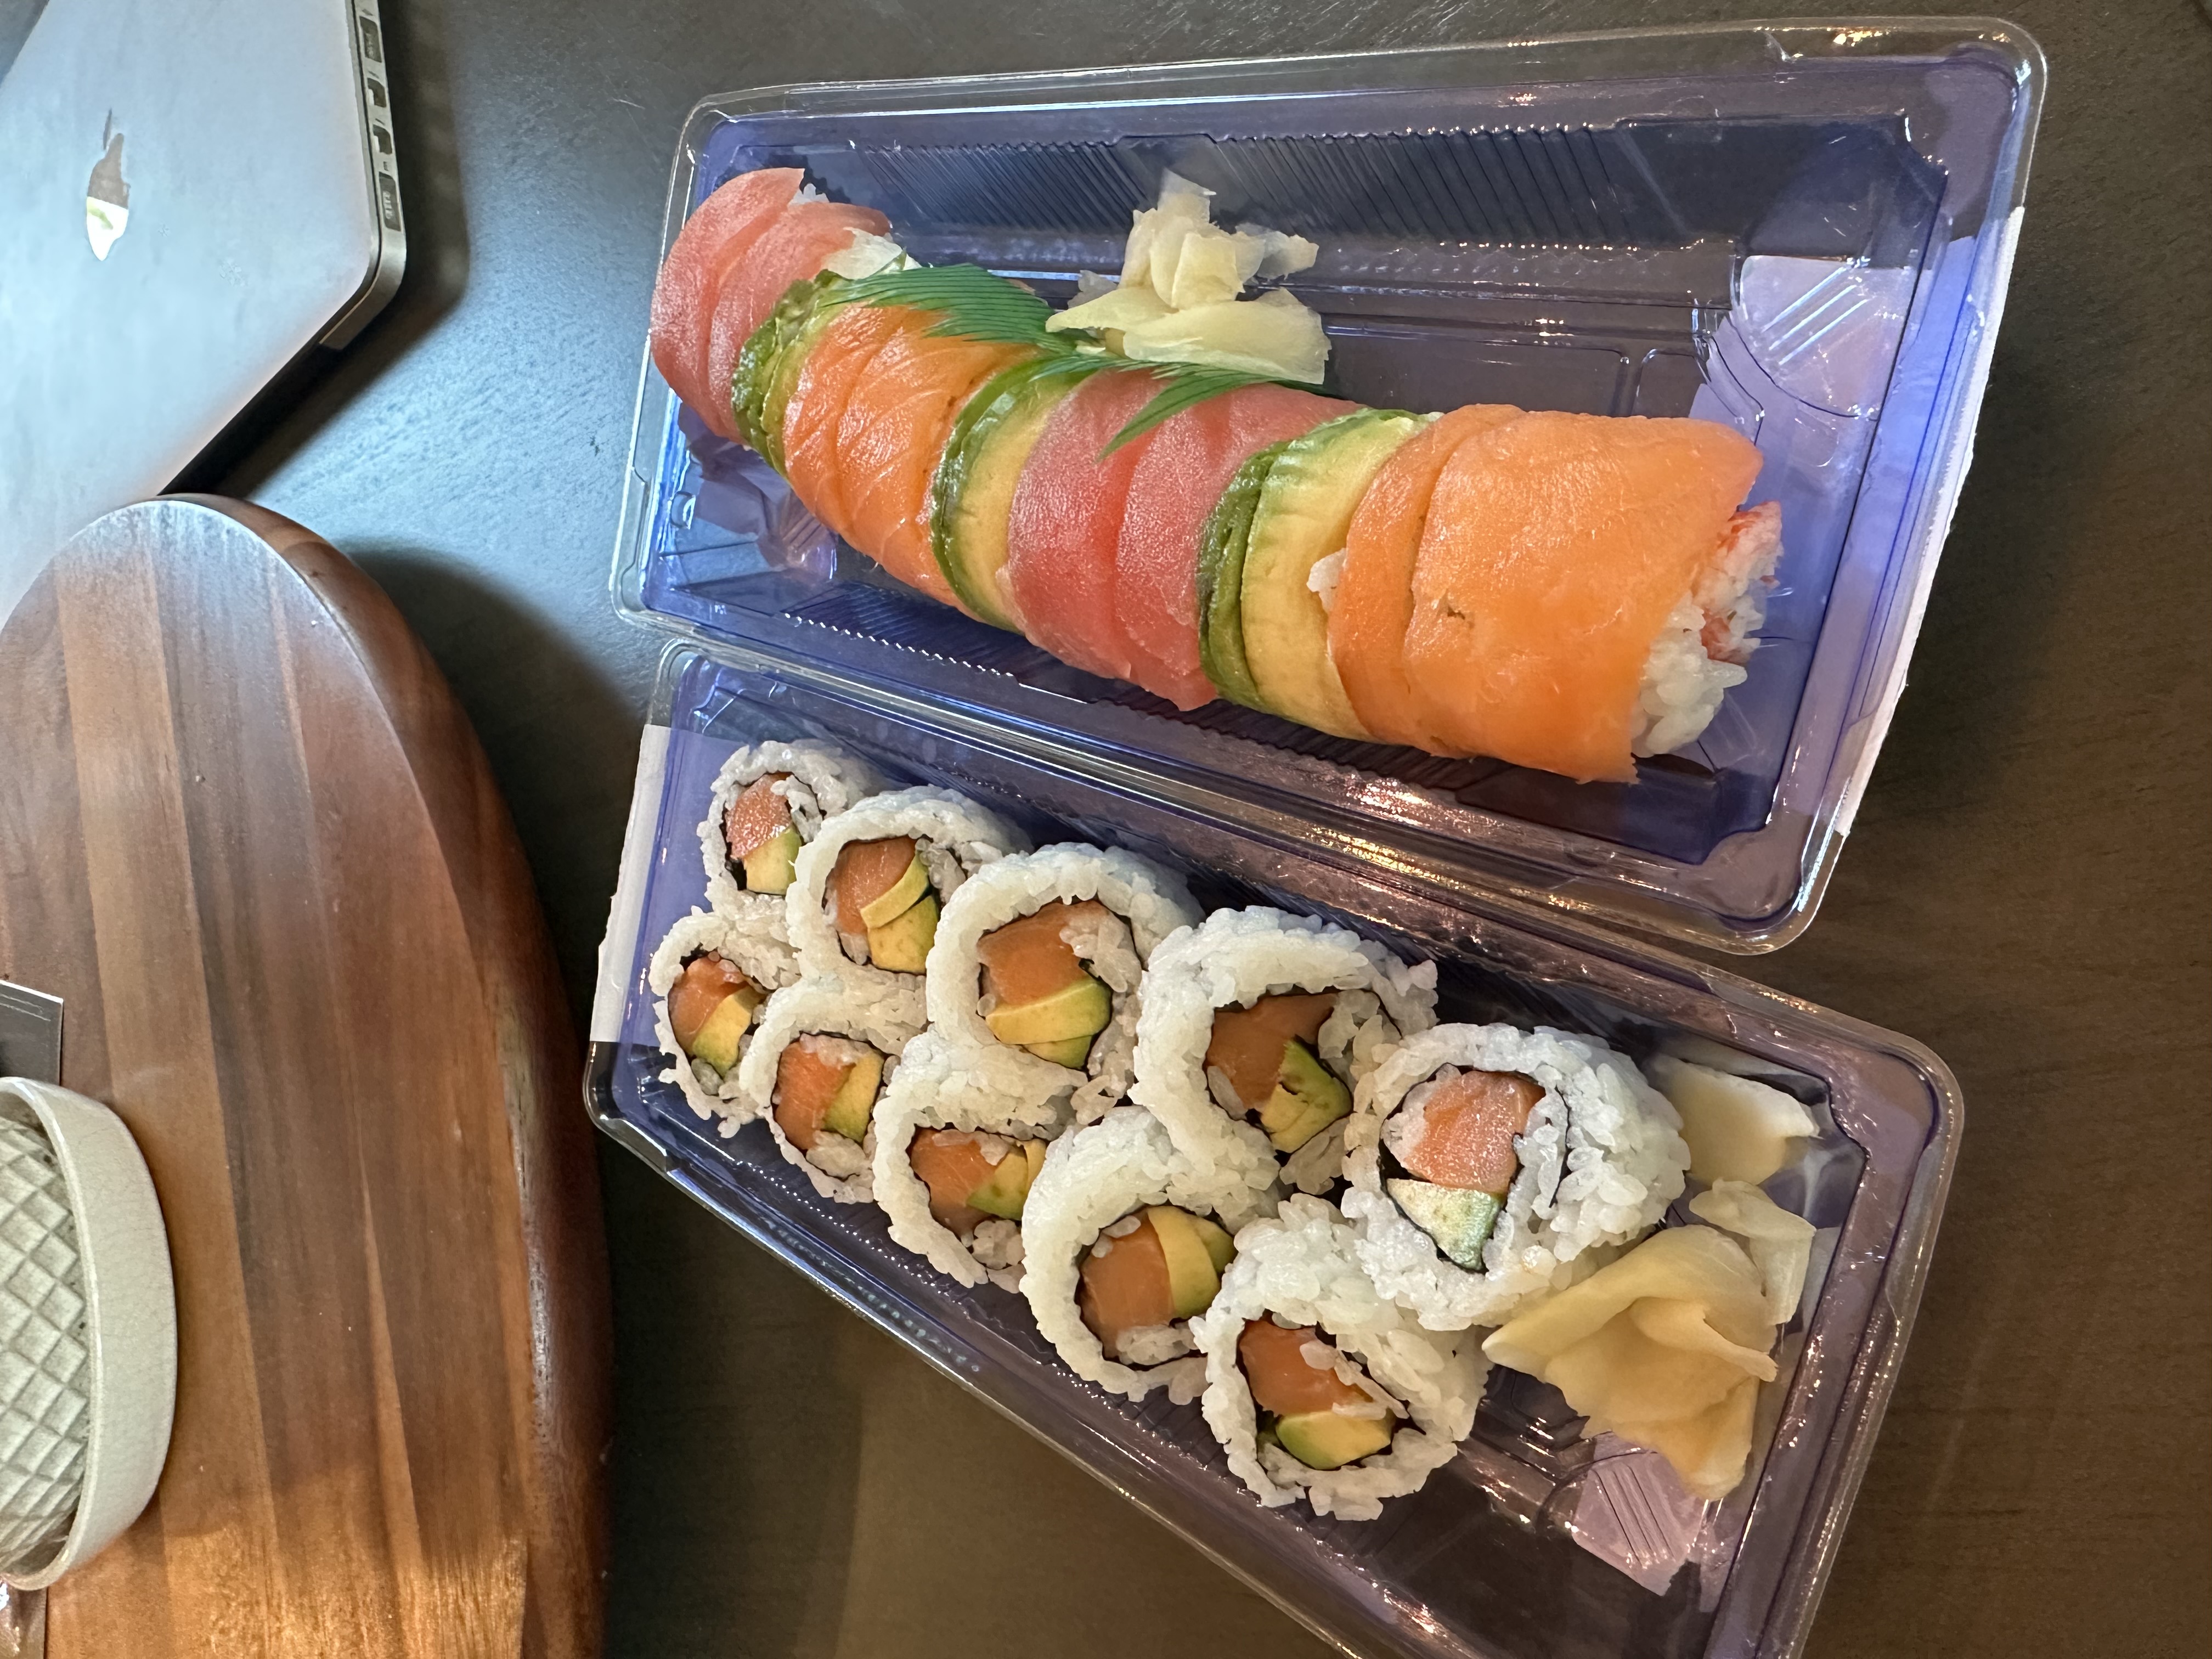 This is a photo of some sushi